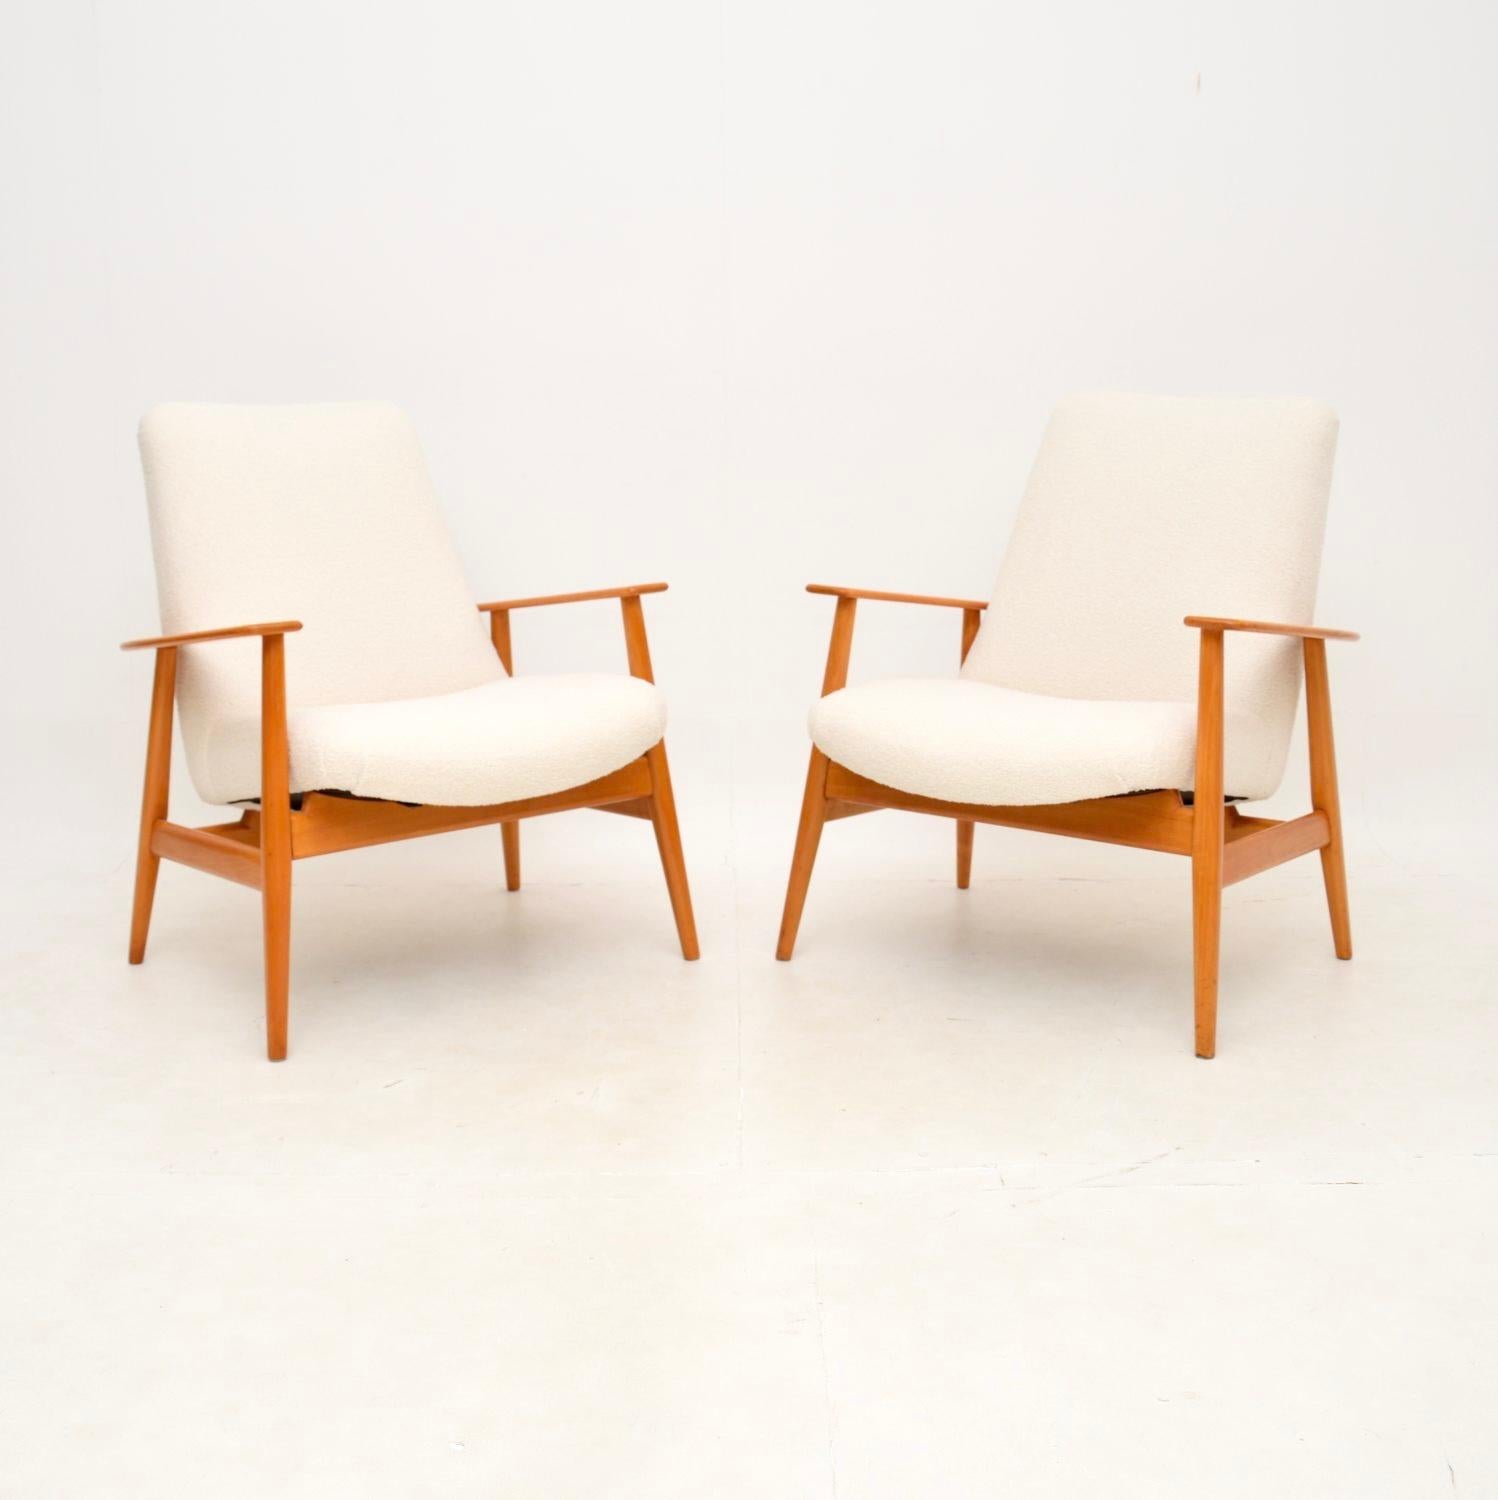 A stylish and extremely well made pair of Danish vintage armchairs in Cherry wood. They were recently imported from Denmark, they date from the 1950-60’s.

They are of amazing quality and are very comfortable. They look amazing from all angels, with